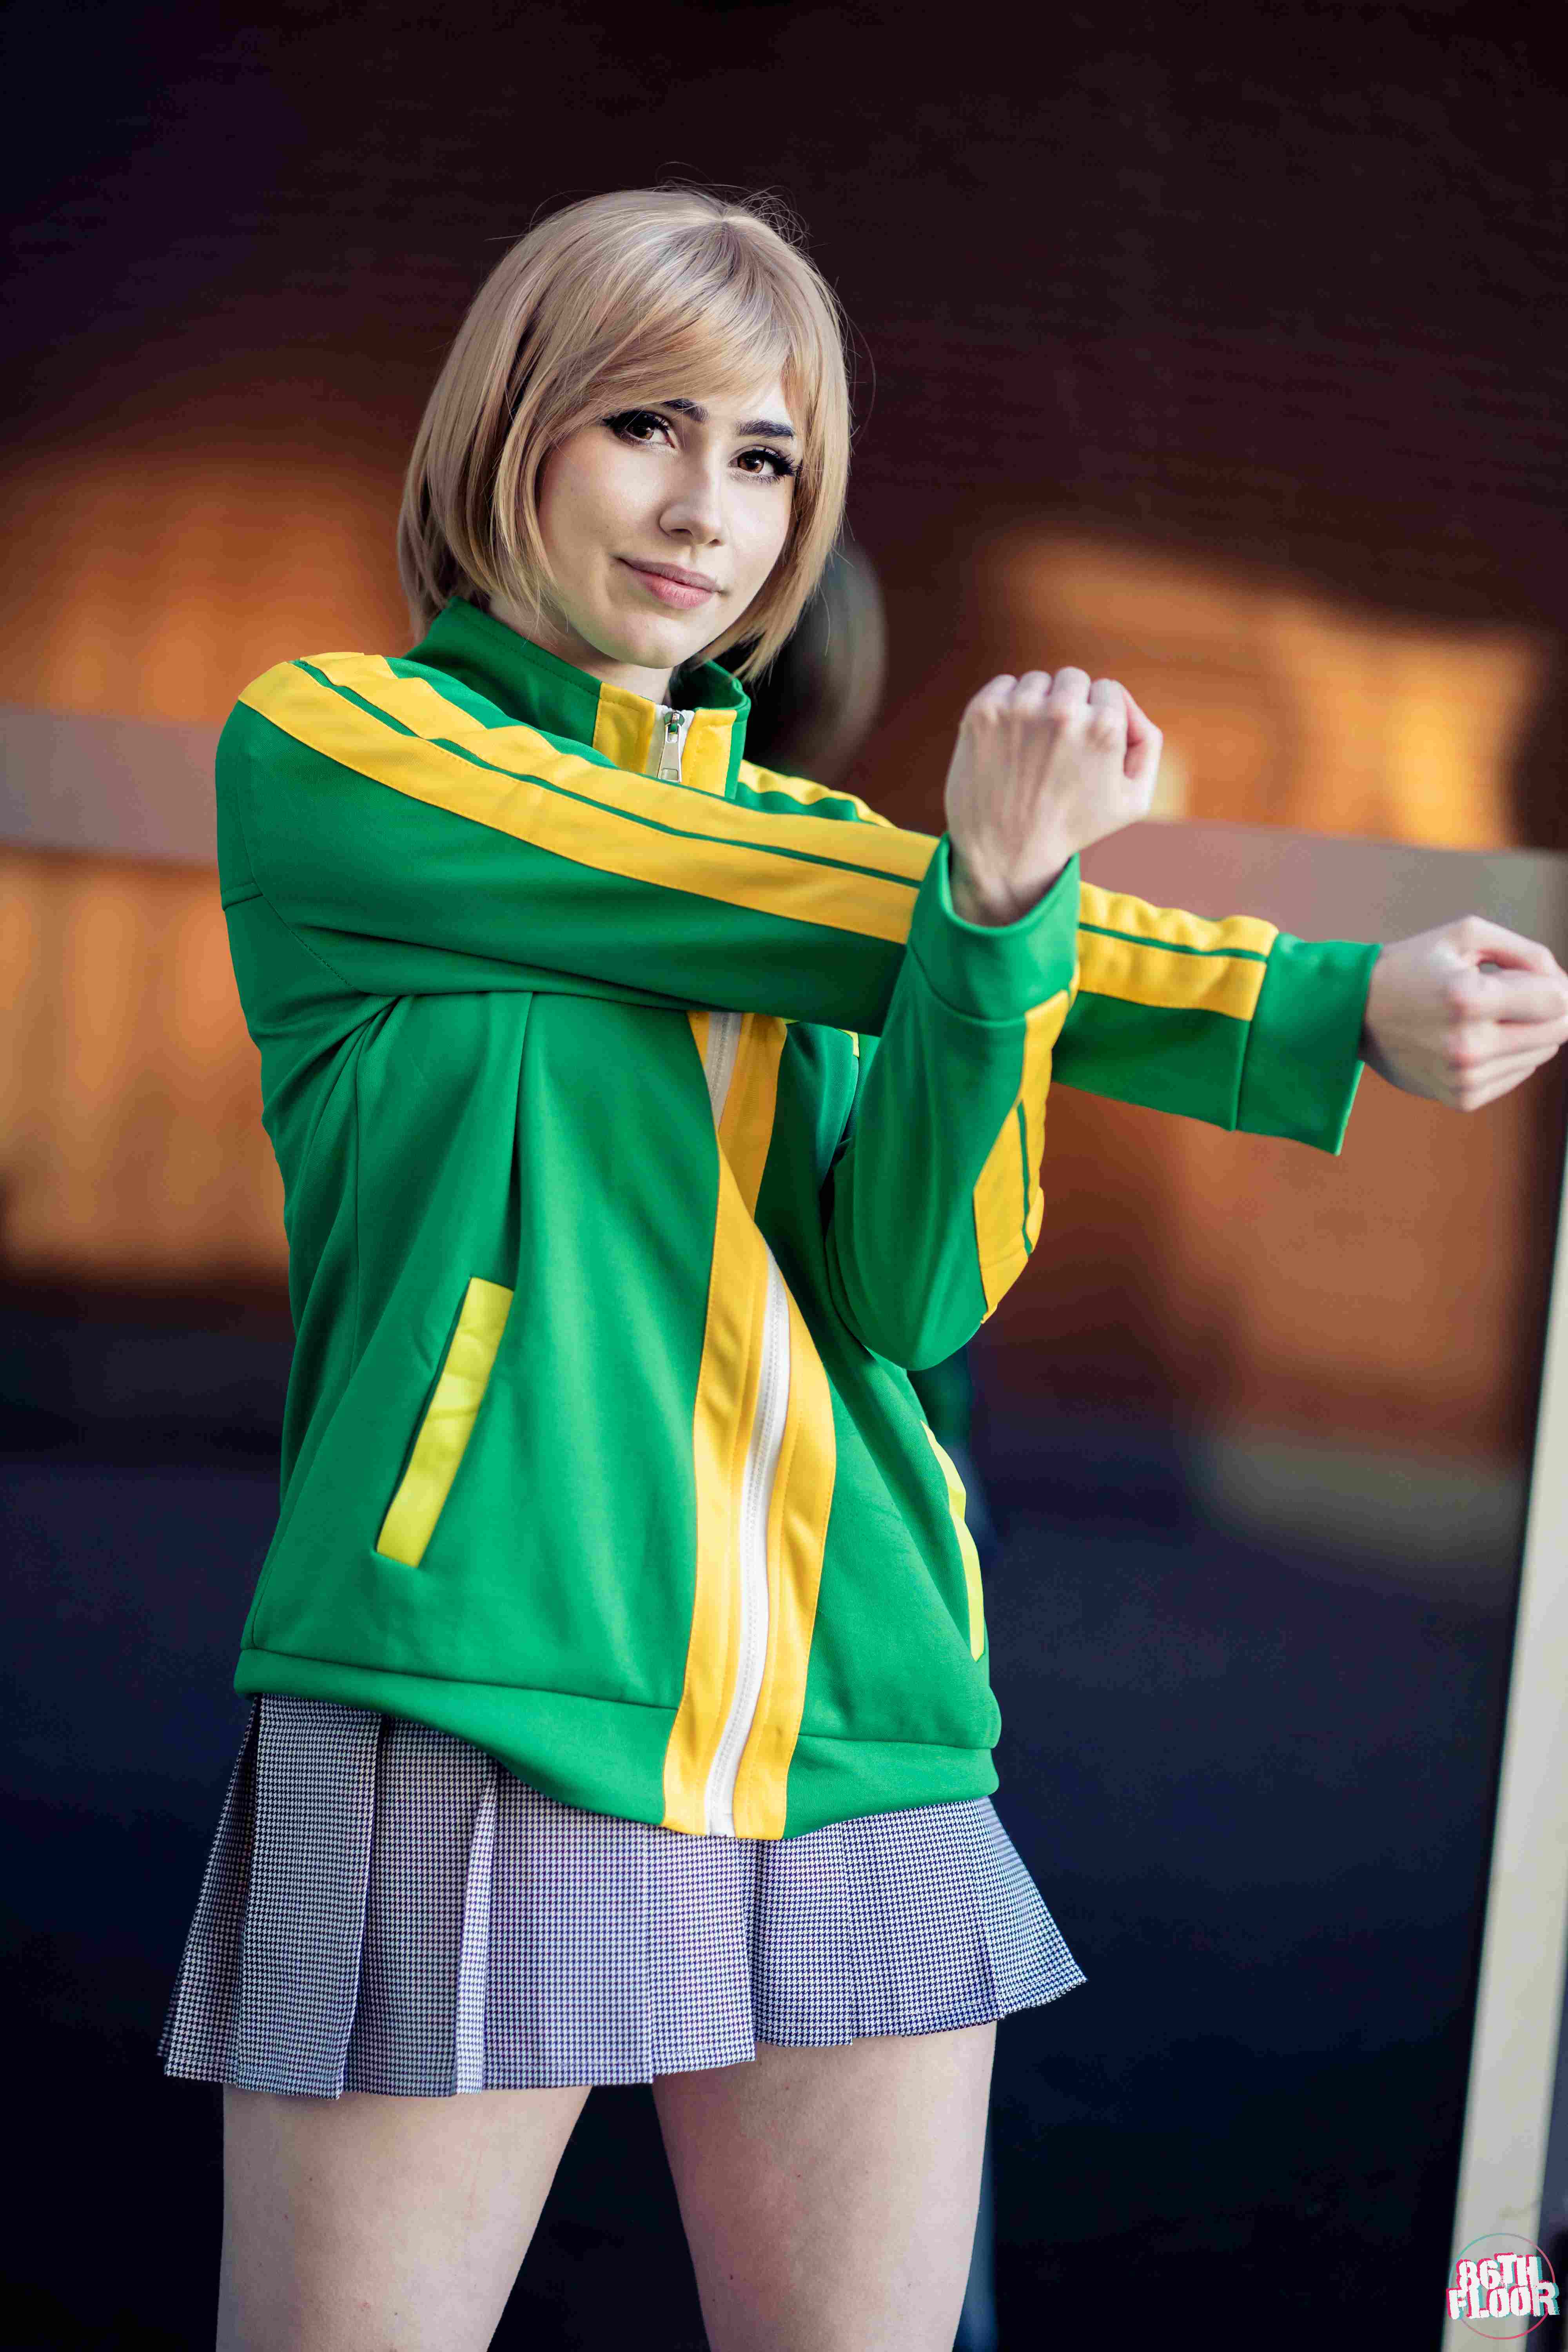 Chie Satonaka cosplayer from Persona 4 at MCM October Comic Con 